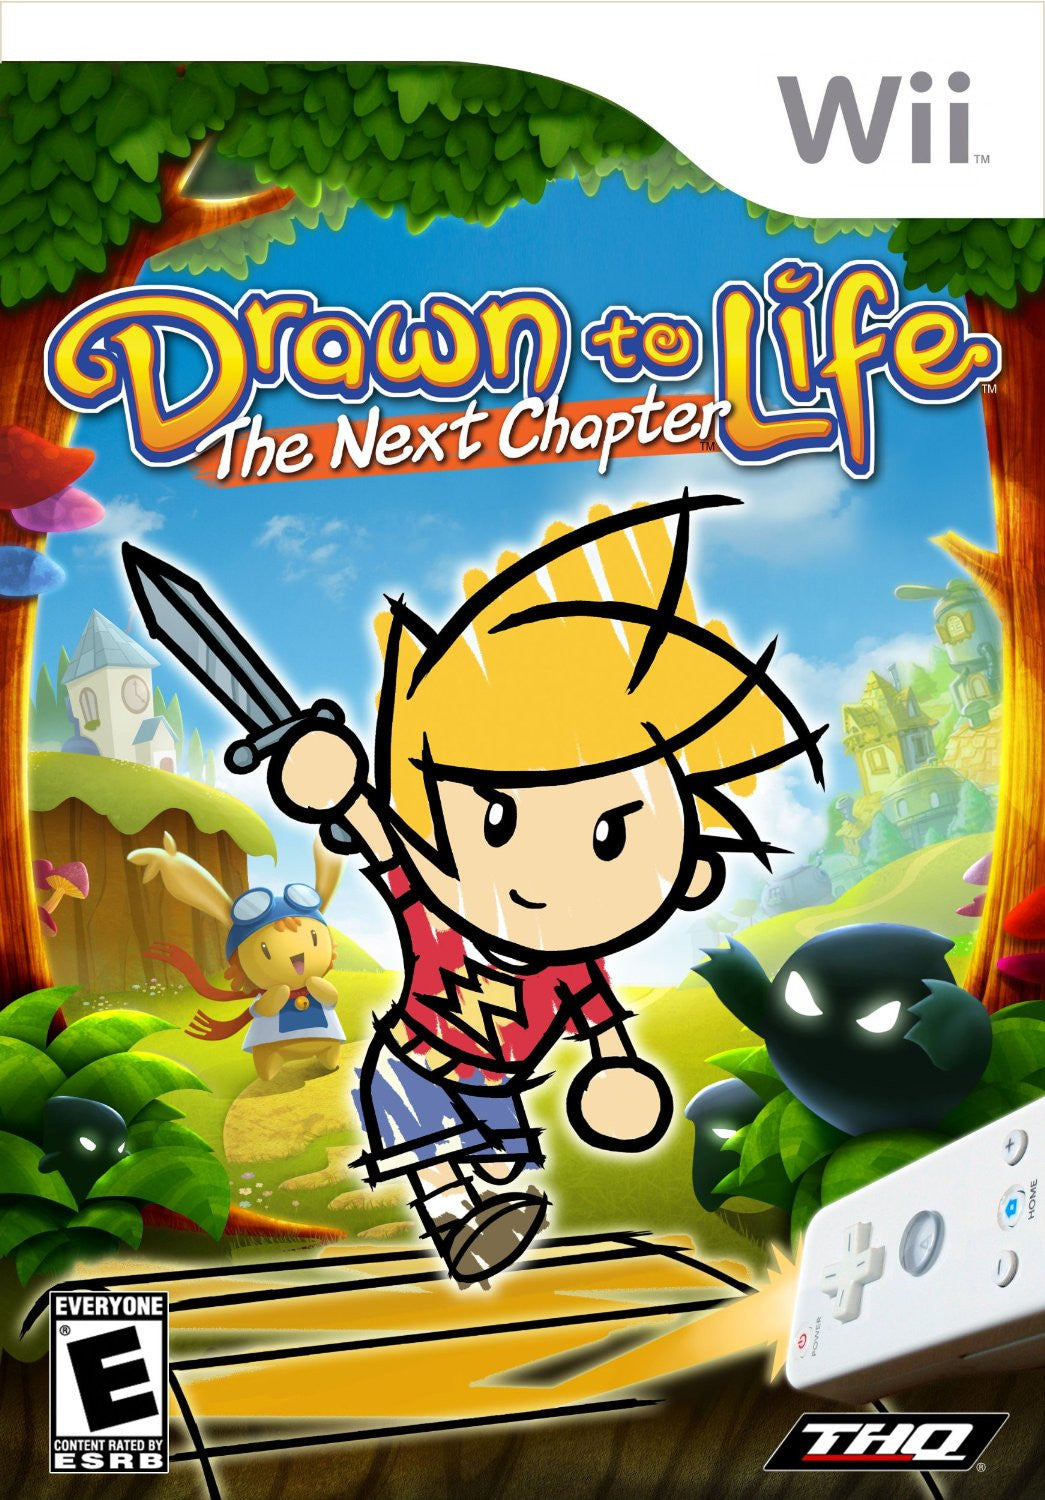 Drawn to Life: the Next Chapter - Nintendo Wii